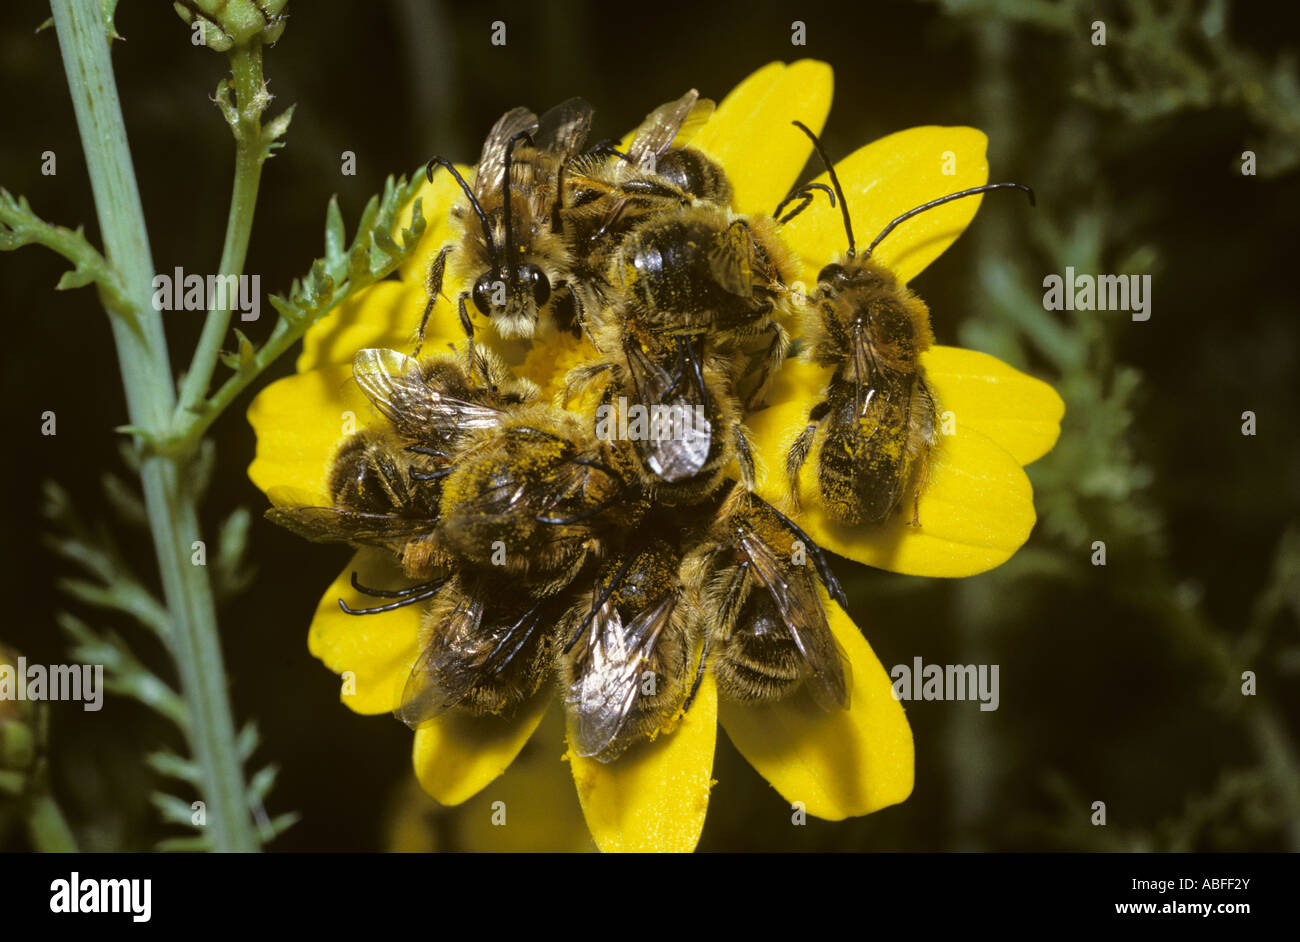 Solitary bees Eucera cilicica Anthophoridae males in communal roost at dusk having spent the day competing for females Israel Stock Photo